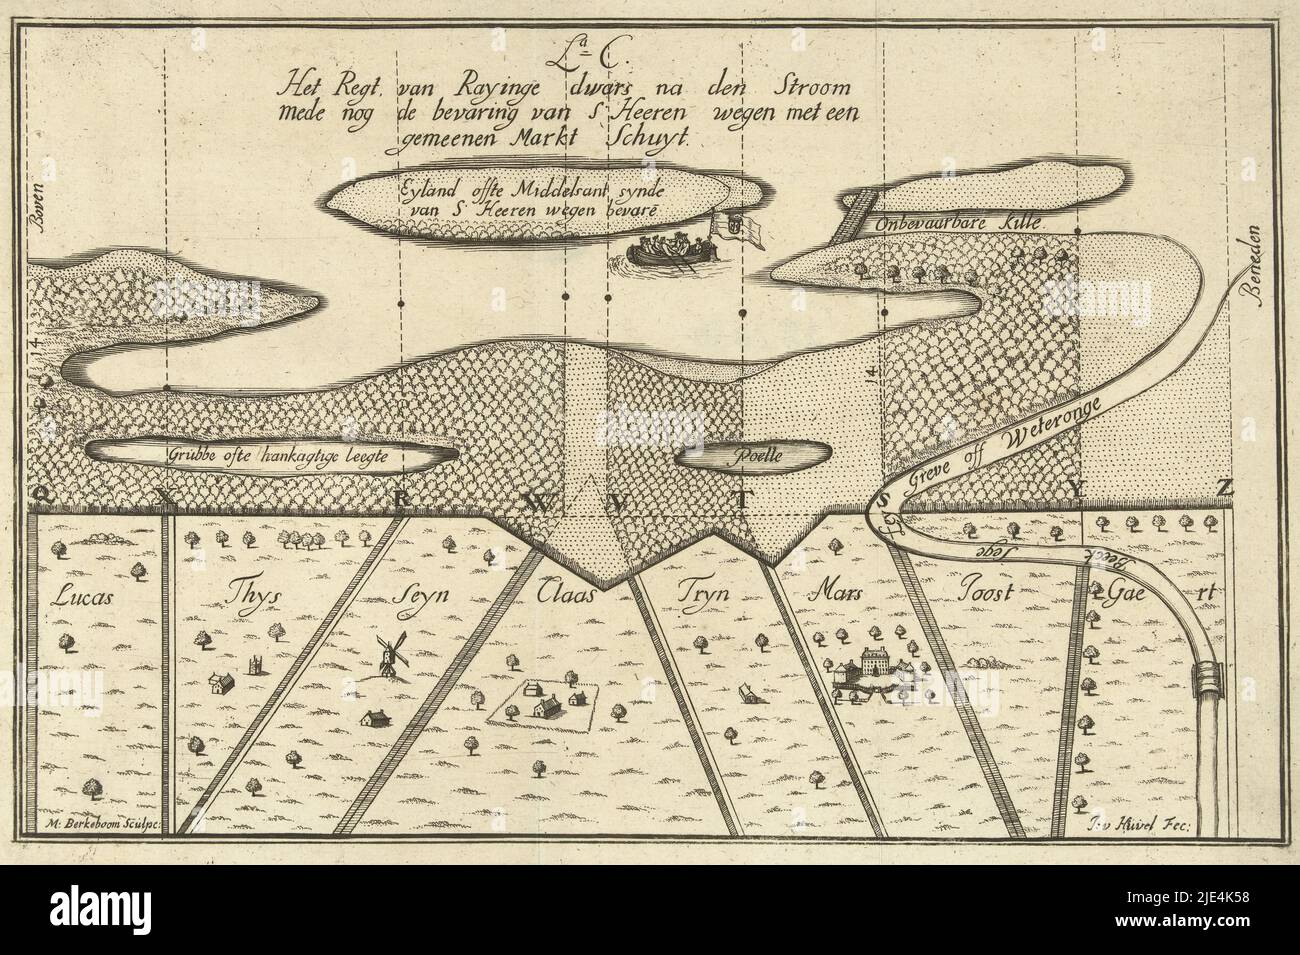 Map of a bay in the coastline (without letters), Martinus Berkenboom, after J. van Heuvel, 1650 - 1715, Map of a bay in the coastline. Print is part of a series of prints on hydraulic engineering and reclamation., print maker: Martinus Berkenboom, (mentioned on object), J. van Heuvel, (mentioned on object), Nijmegen, 1650 - 1715, paper, etching, h 200 mm × w 302 mm Stock Photo